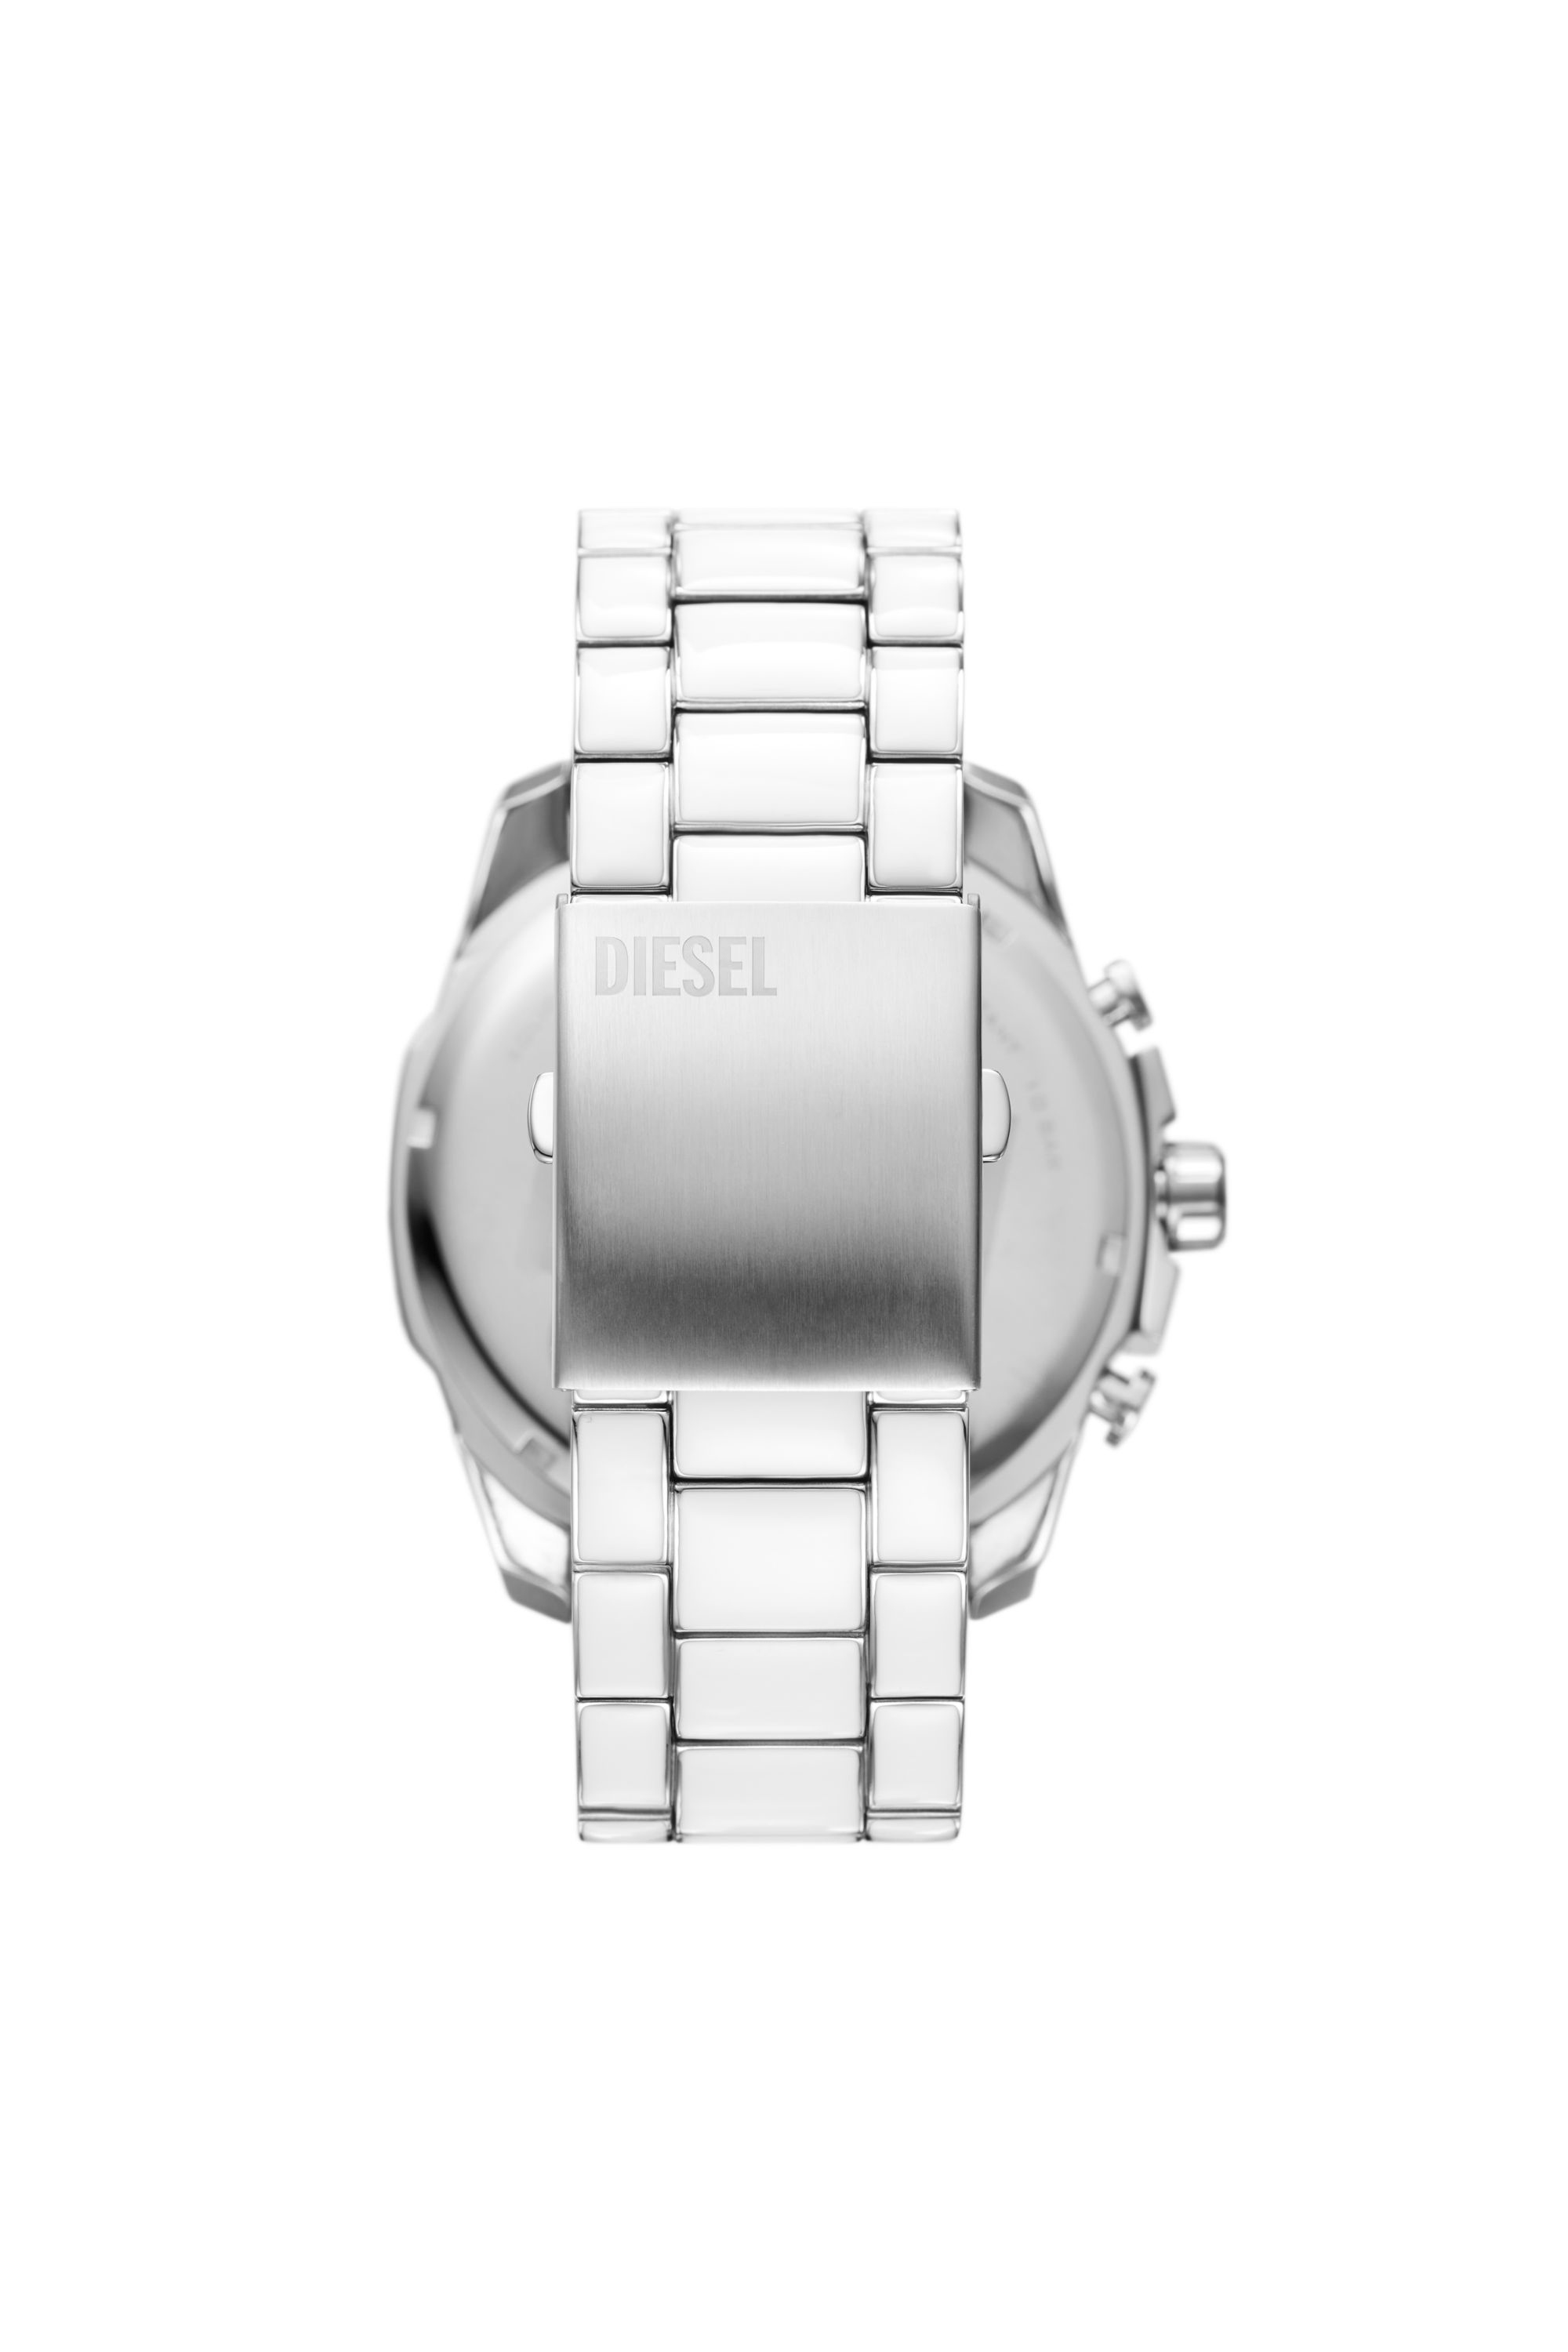 Diesel - DZ4660, Man Mega Chief white and stainless steel watch in Silver - Image 2